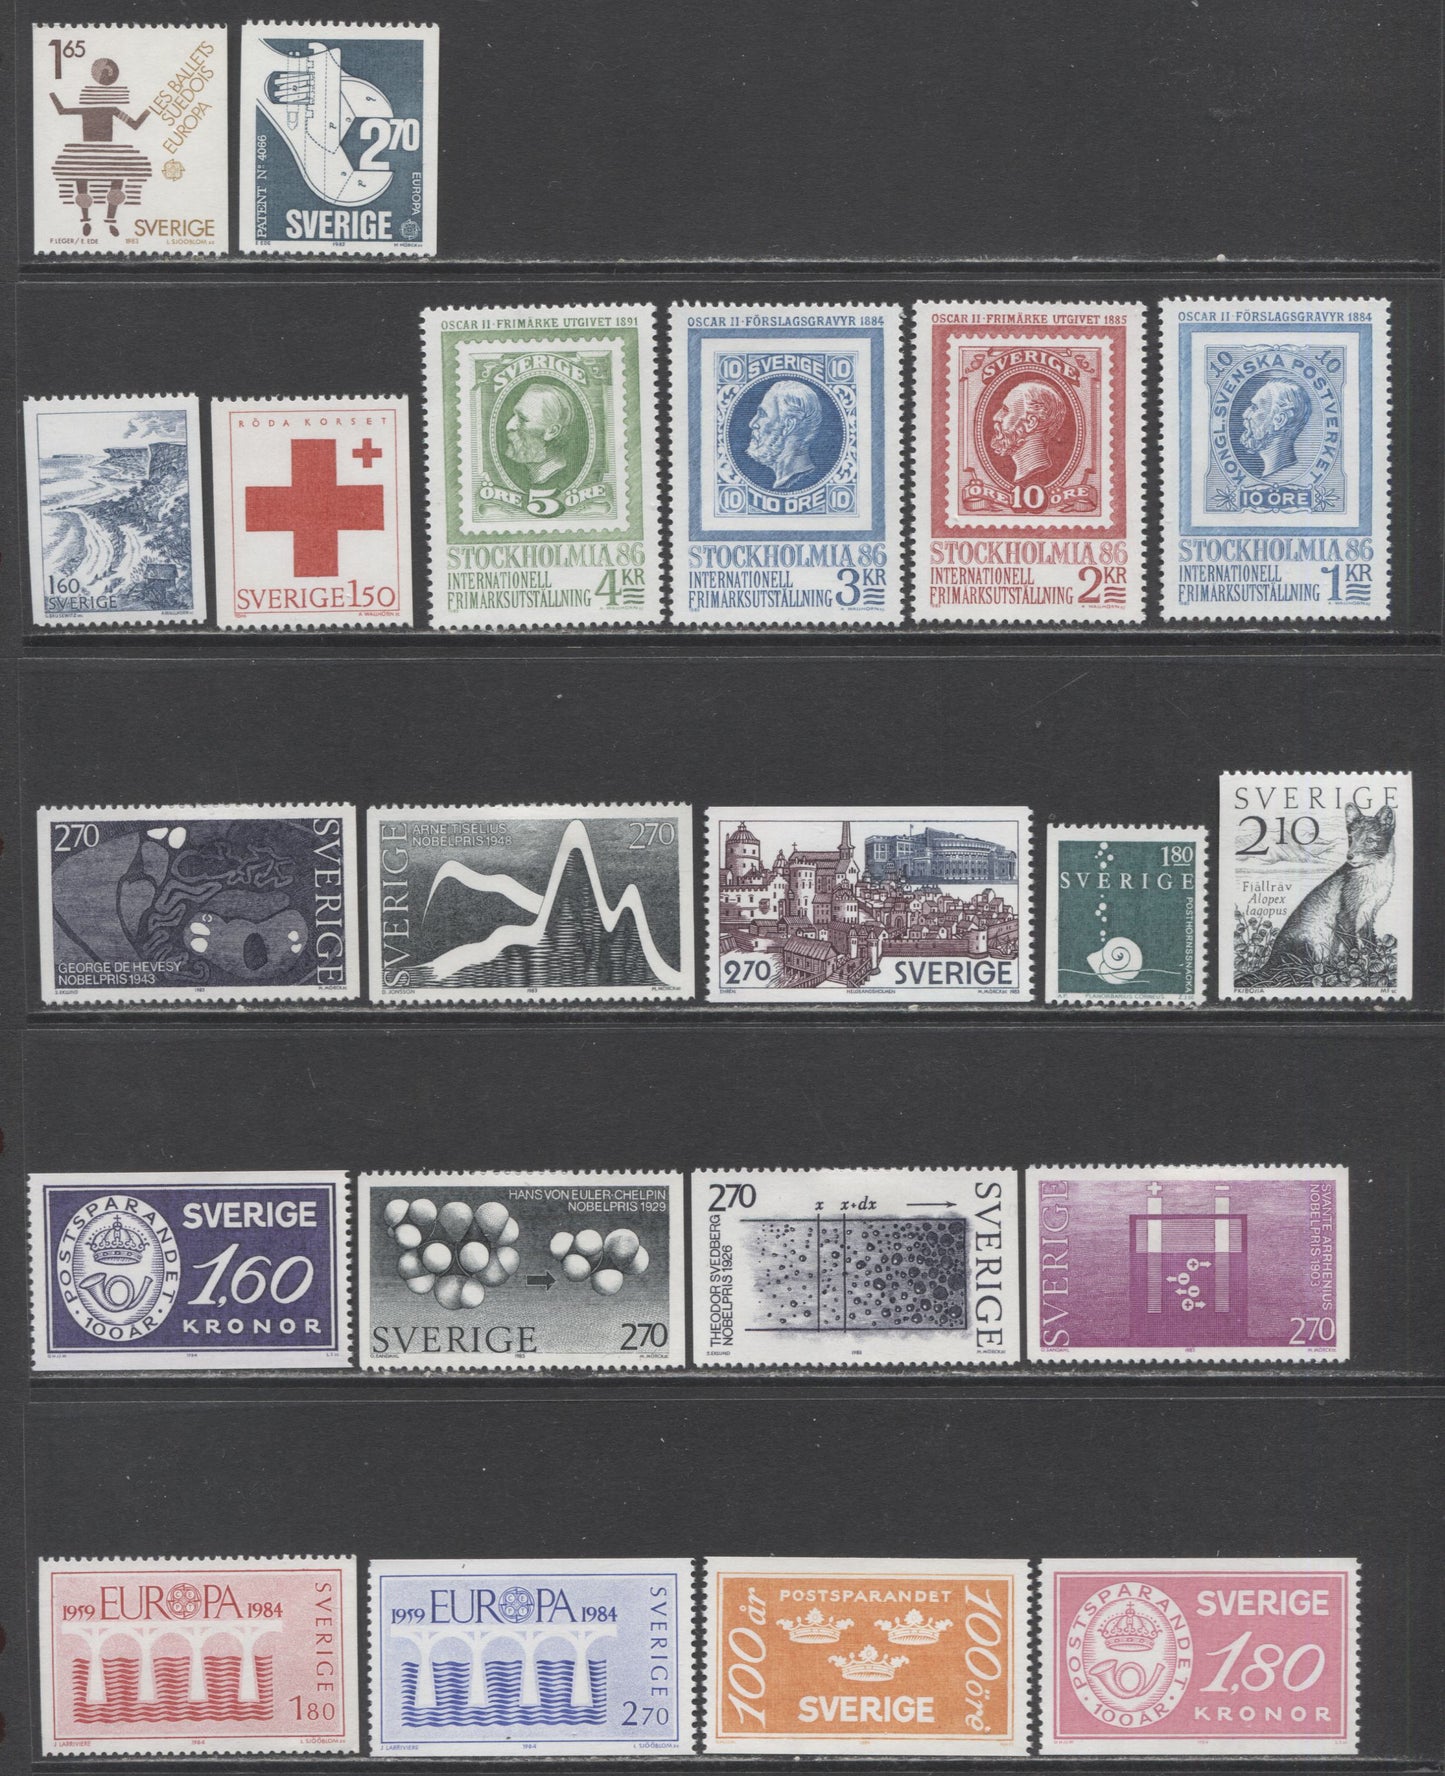 Lot 259 Sweden SC#1460-1484 1983-1984 Commemoratives, 25 VFNH/LH Singles, Pairs, Blocks Of 4 & Souvenir Sheet, Click on Listing to See ALL Pictures, 2017 Scott Cat.$34 USD